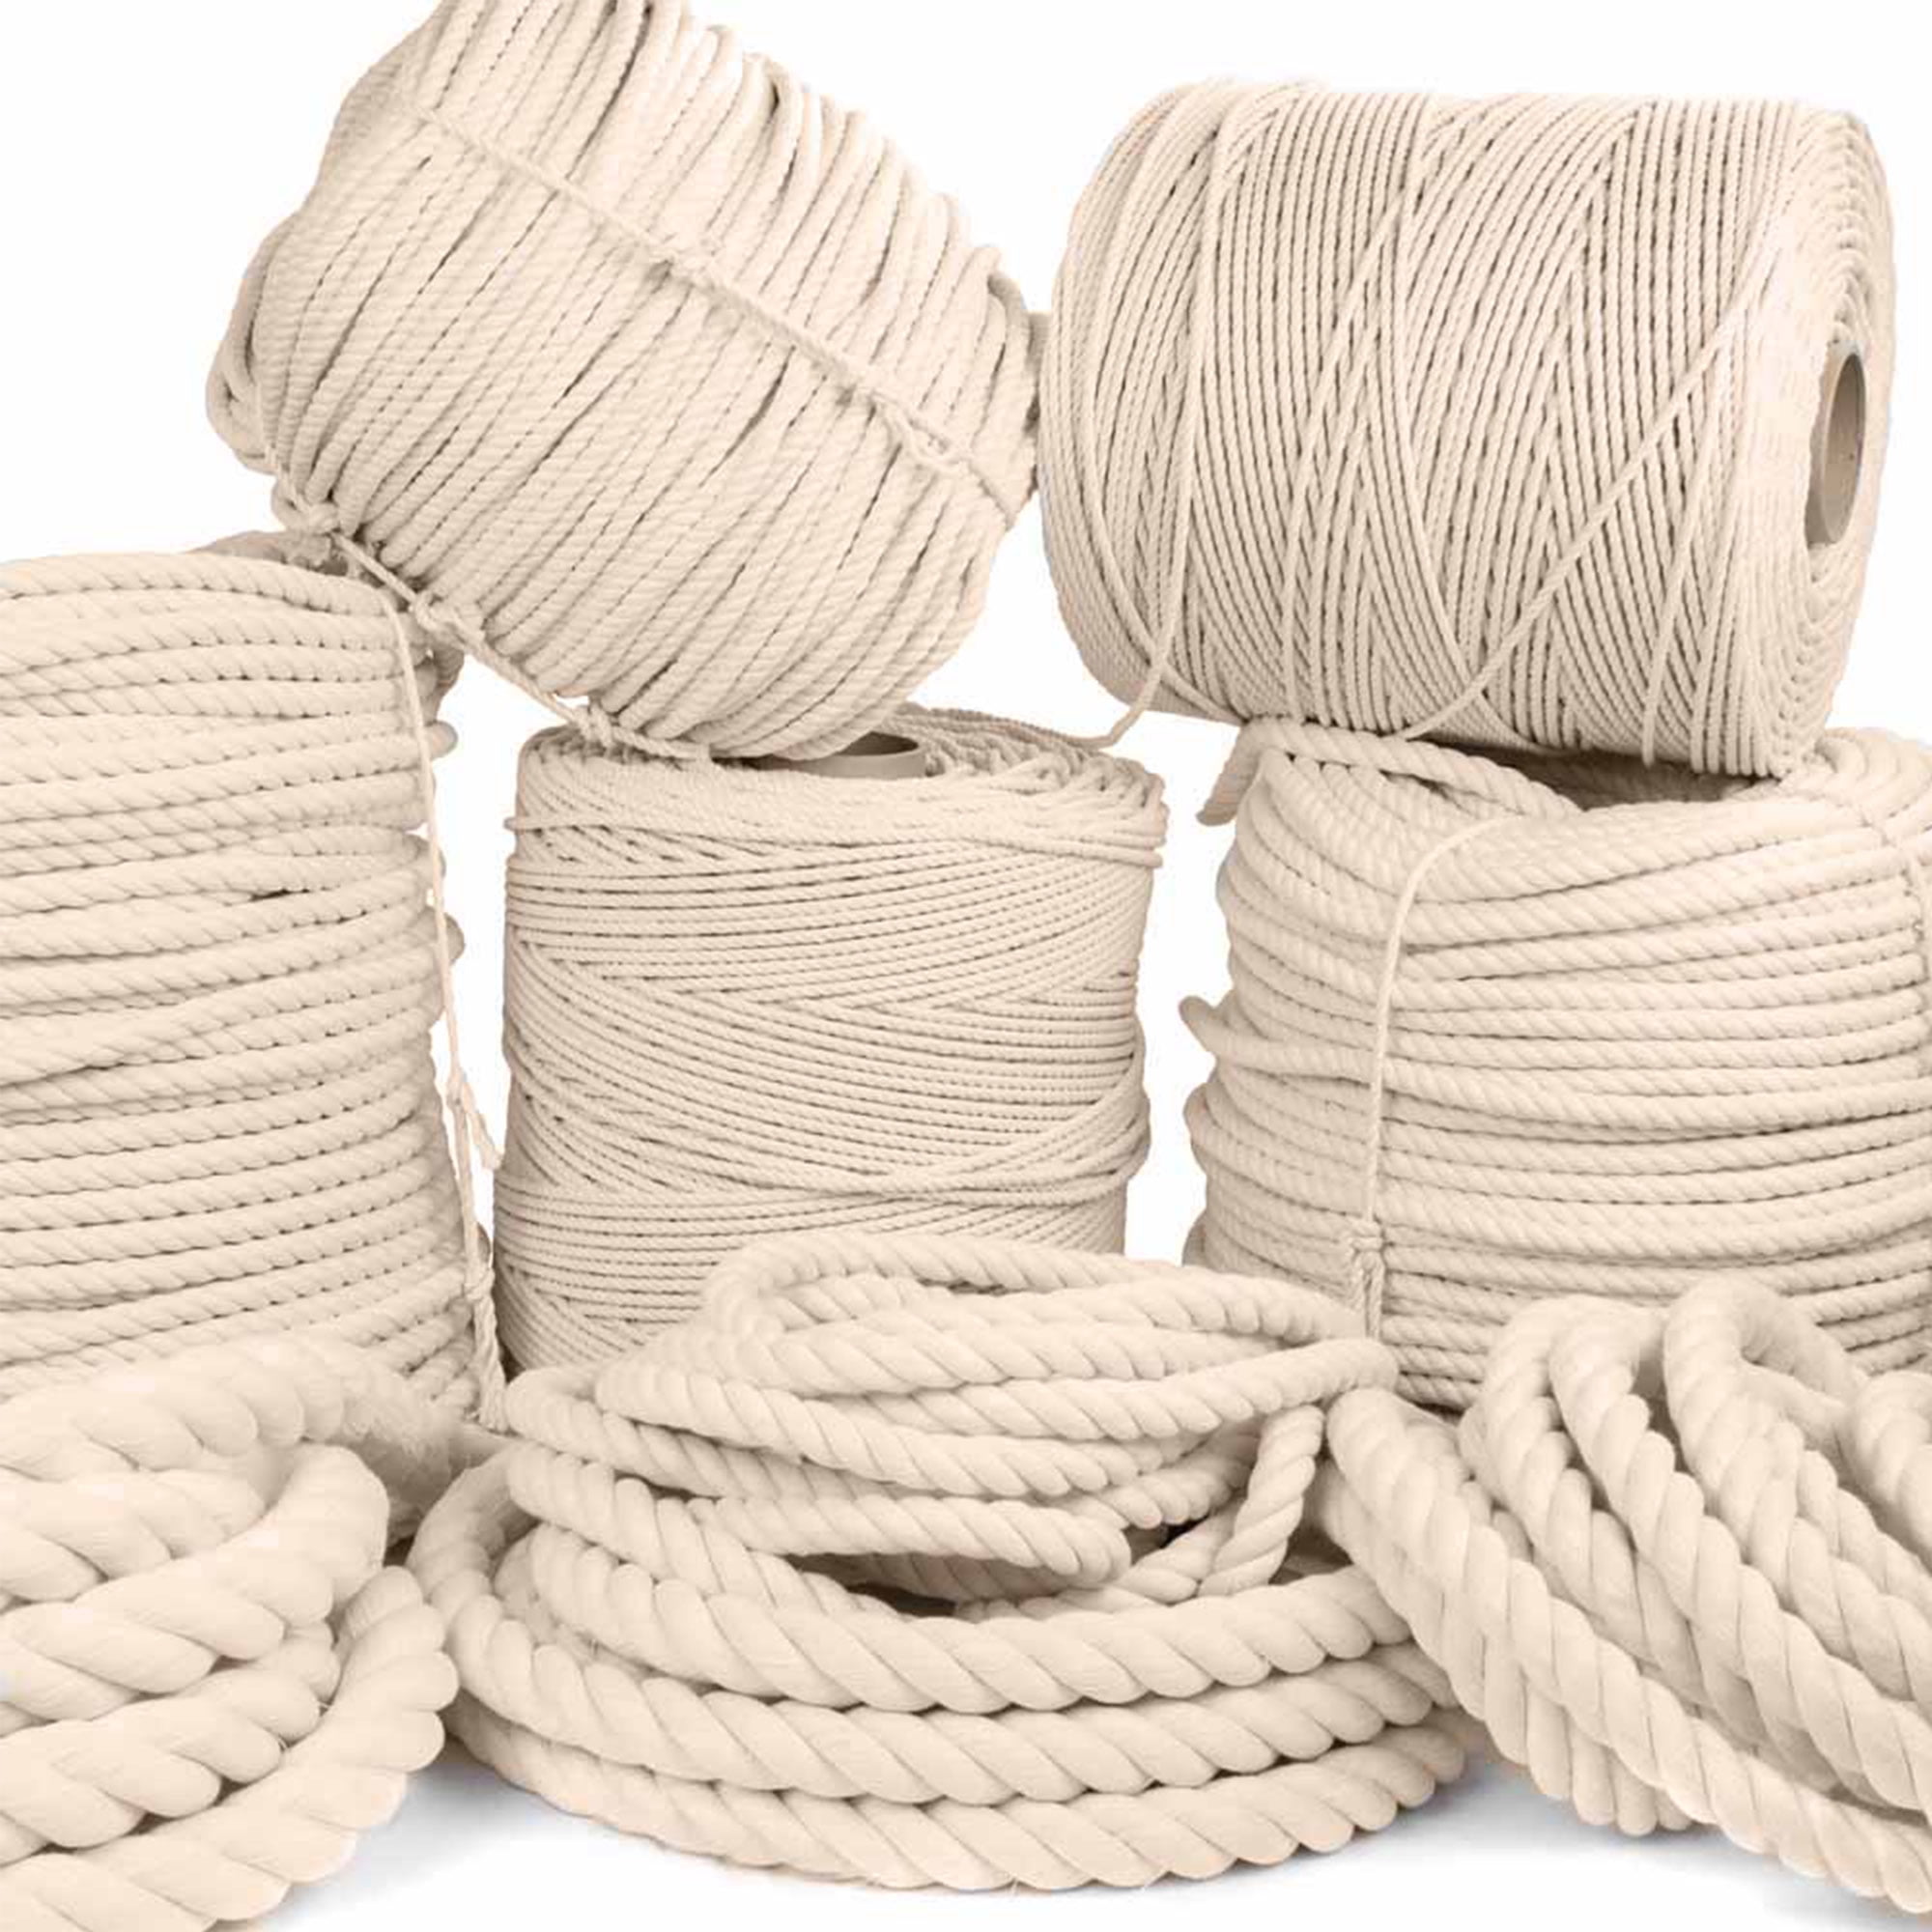 Natural Large Cotton Rope, Hobby Lobby